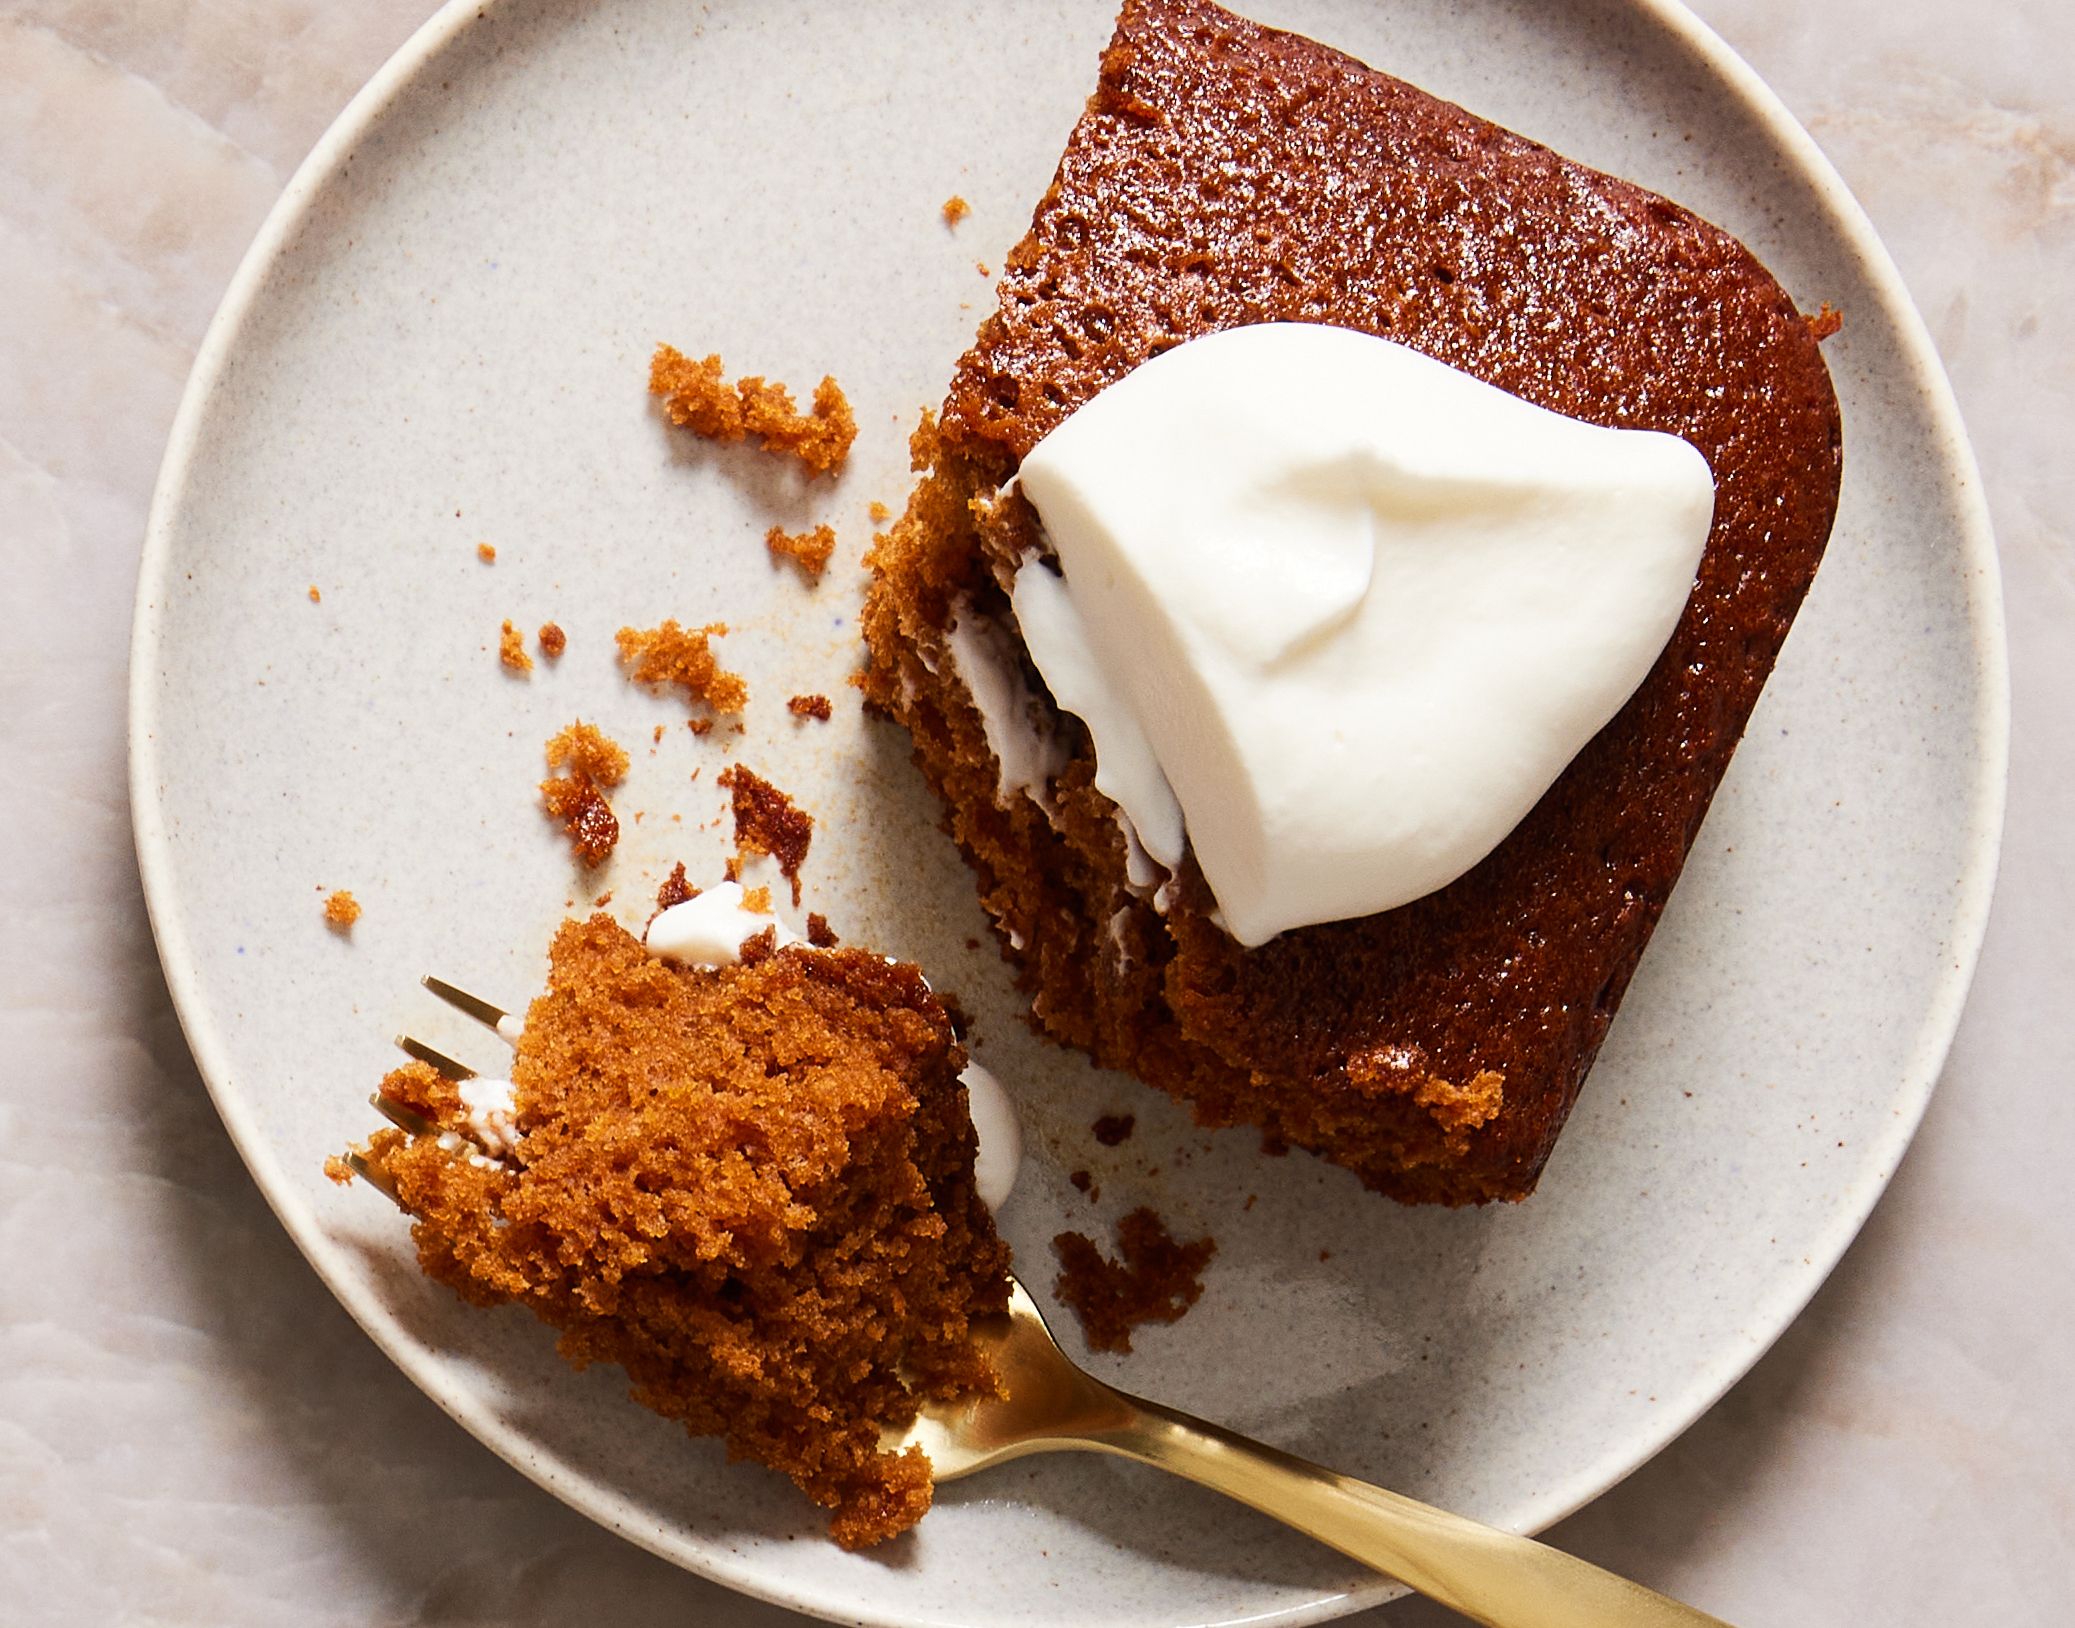 Gingerbread Cake Recipe with Cinnamon Frosting